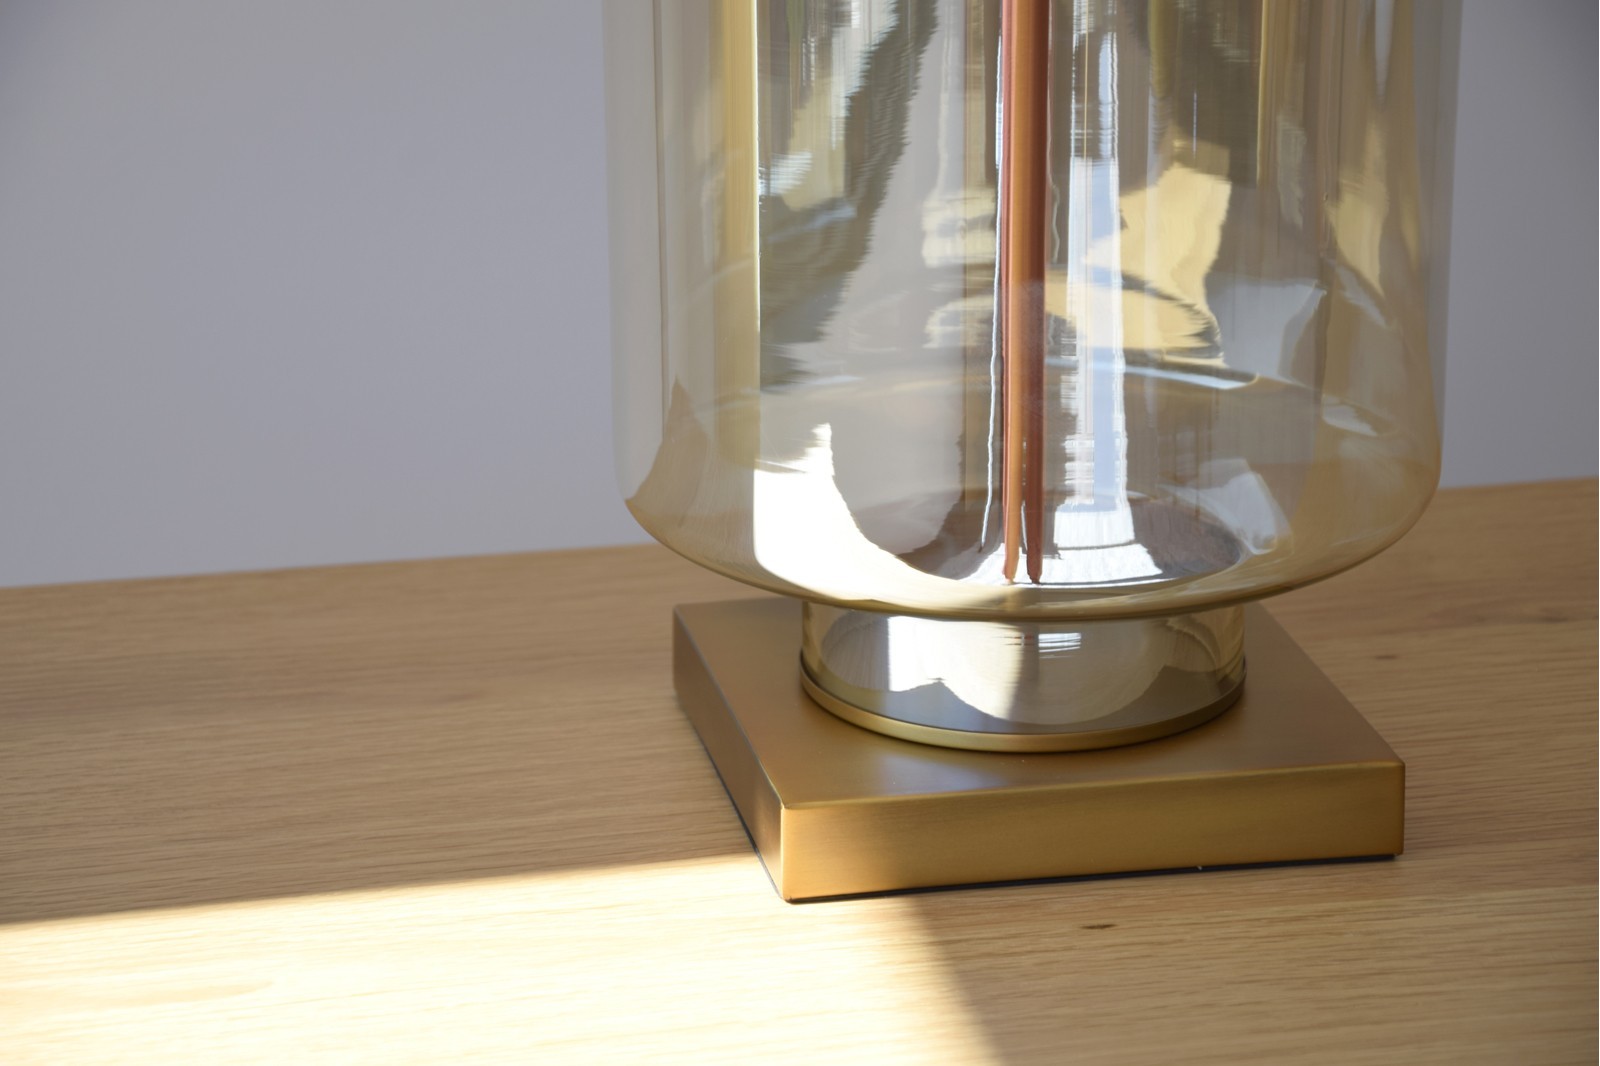 CYLINDER TABLE LAMP.AMBER GLASS. WITH SHADE